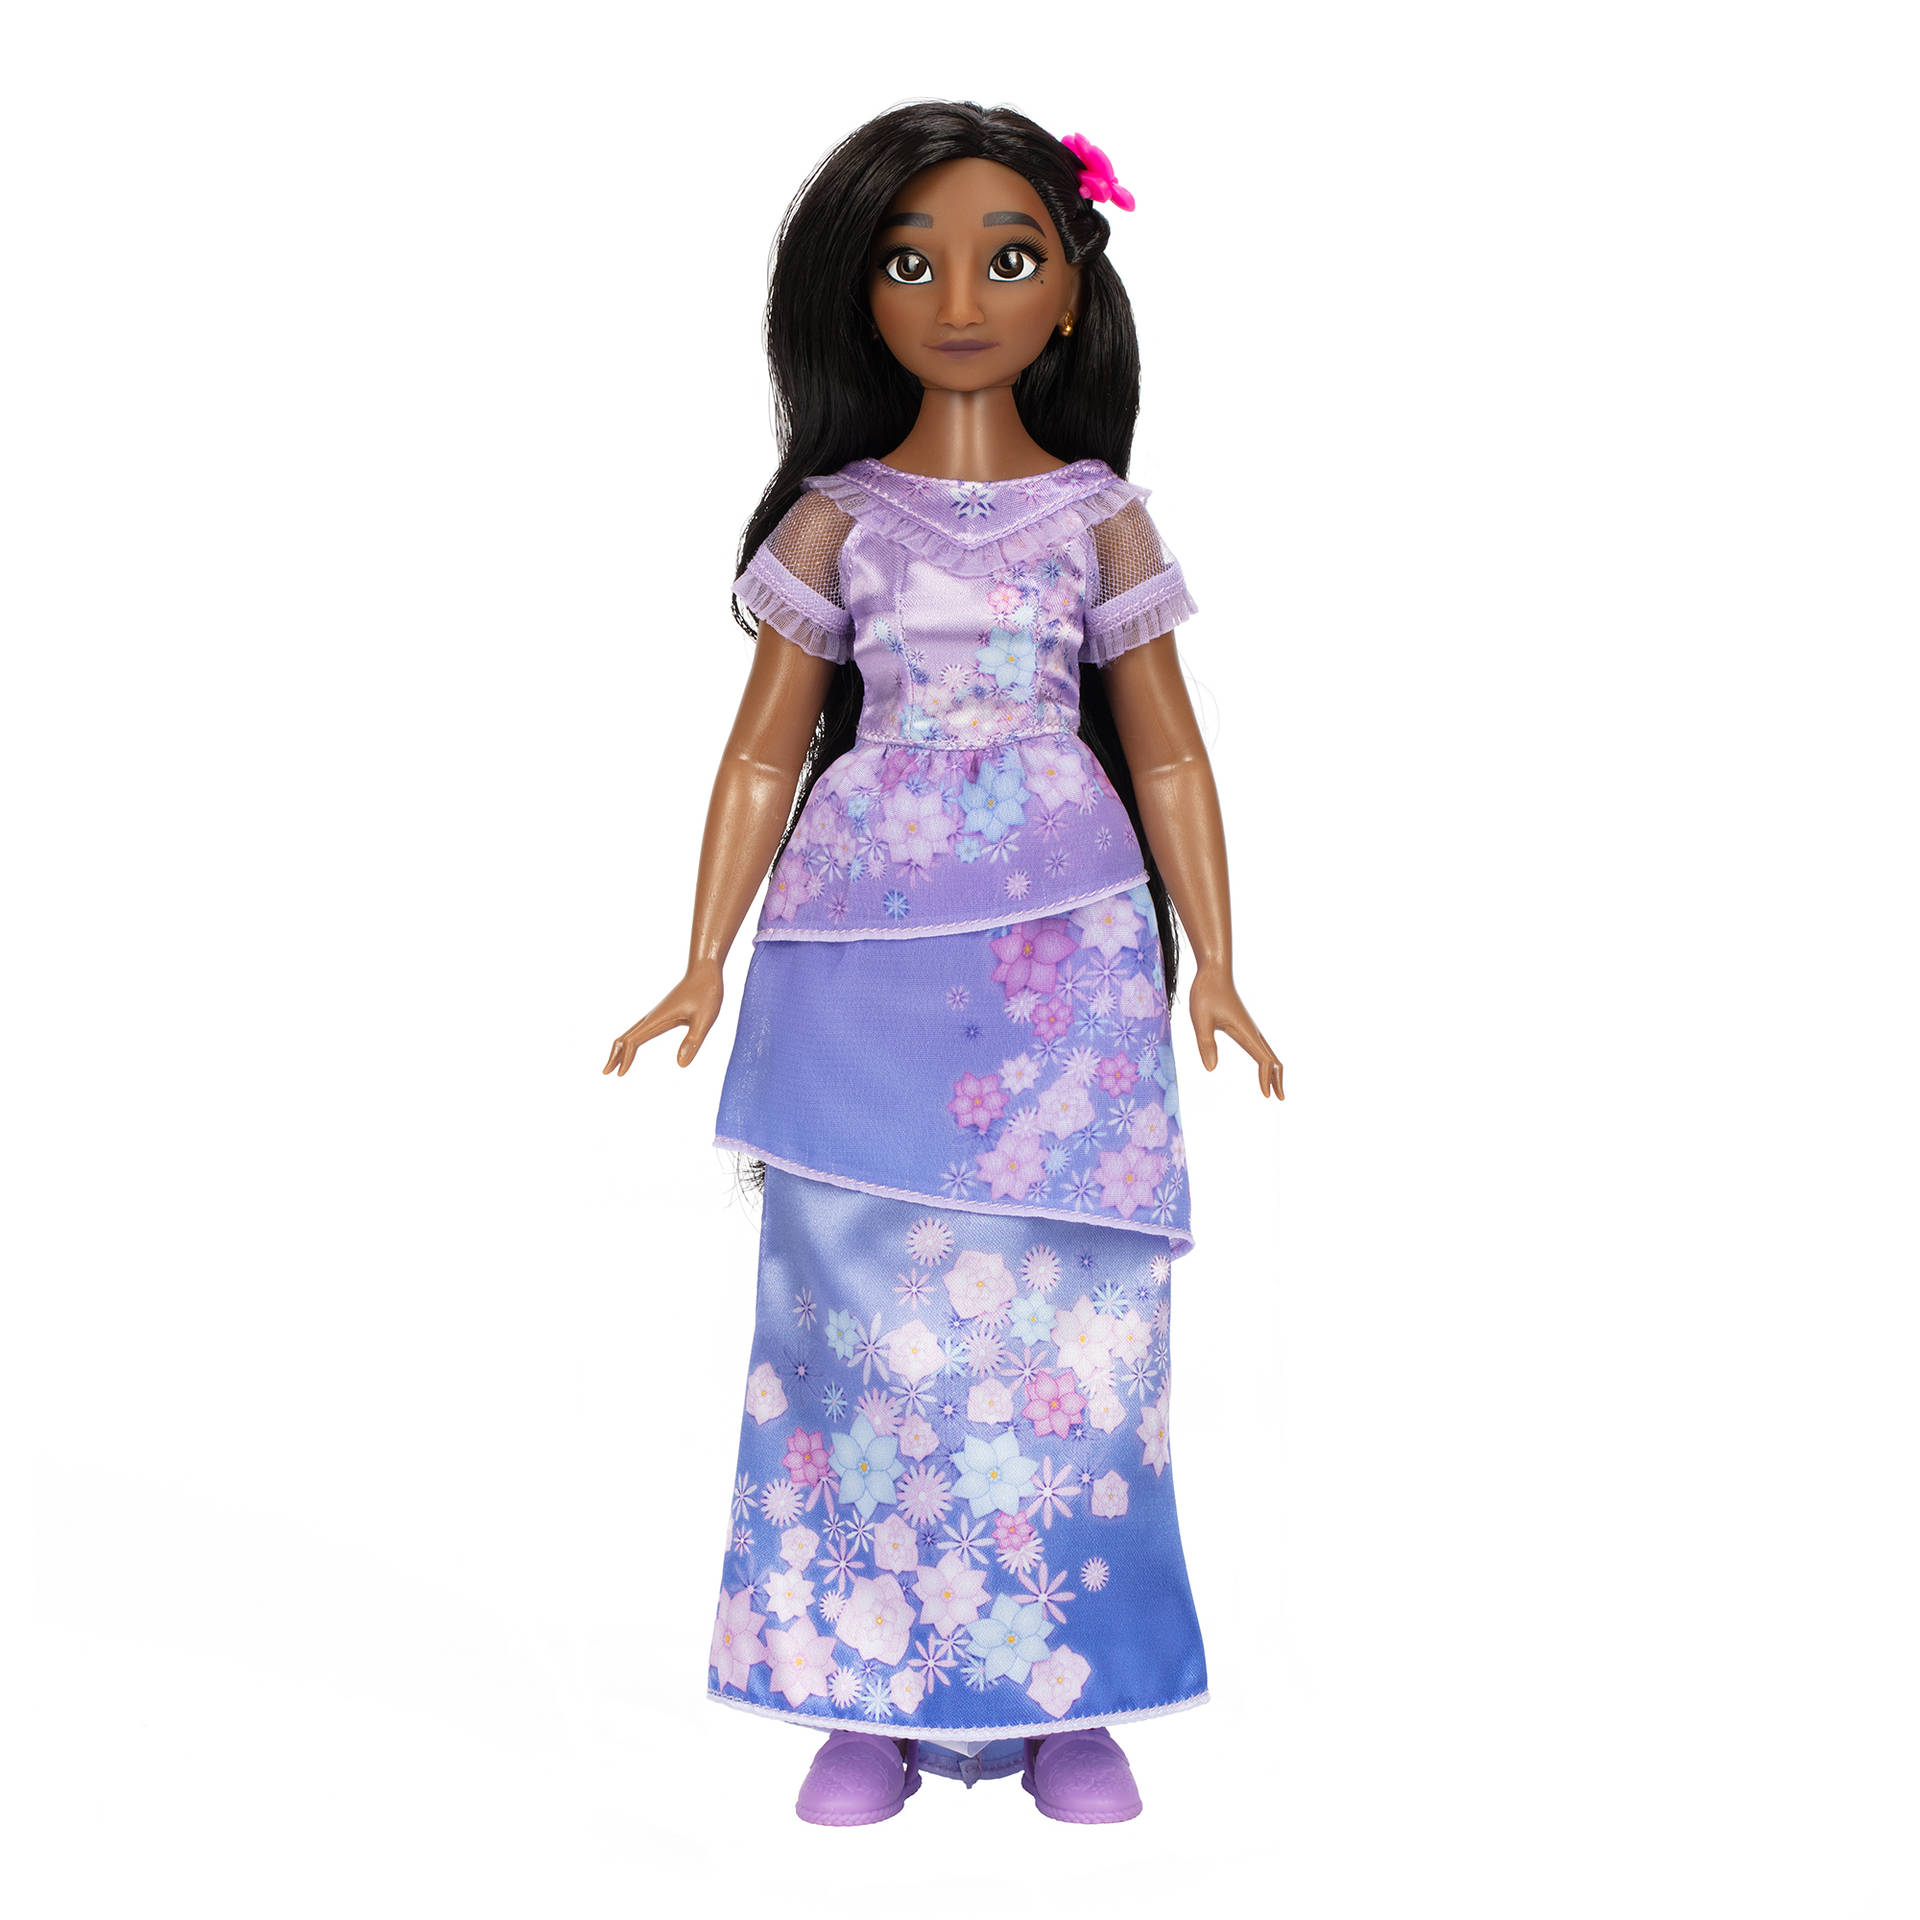 Caption: Isabela Madrigal - The doll version of the enchanting Disney character Wallpaper